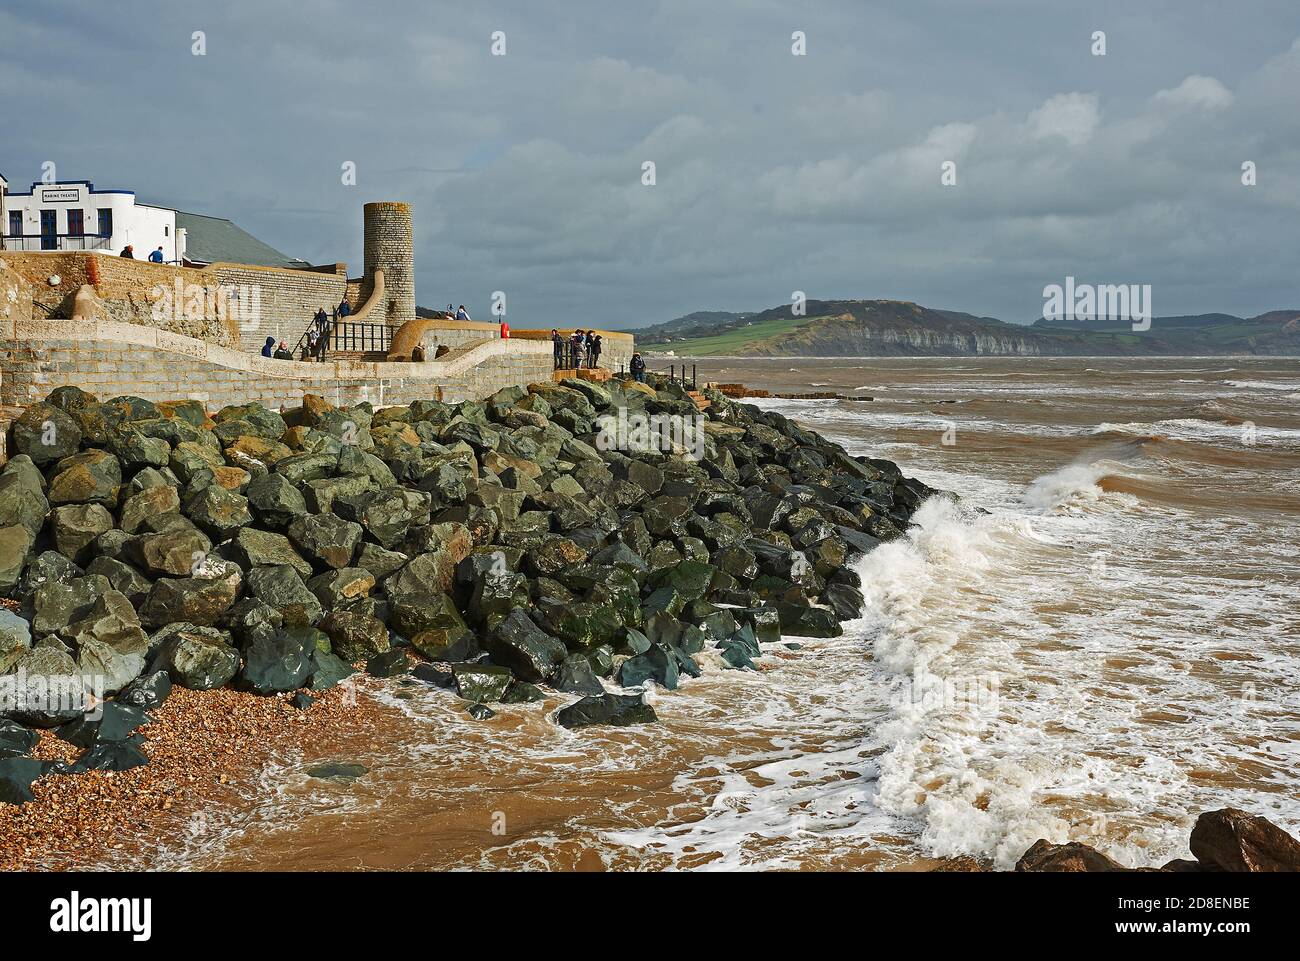 Rock armour sea defences protect the town of Lyme Regis from the intensity of the English Channel Stock Photo